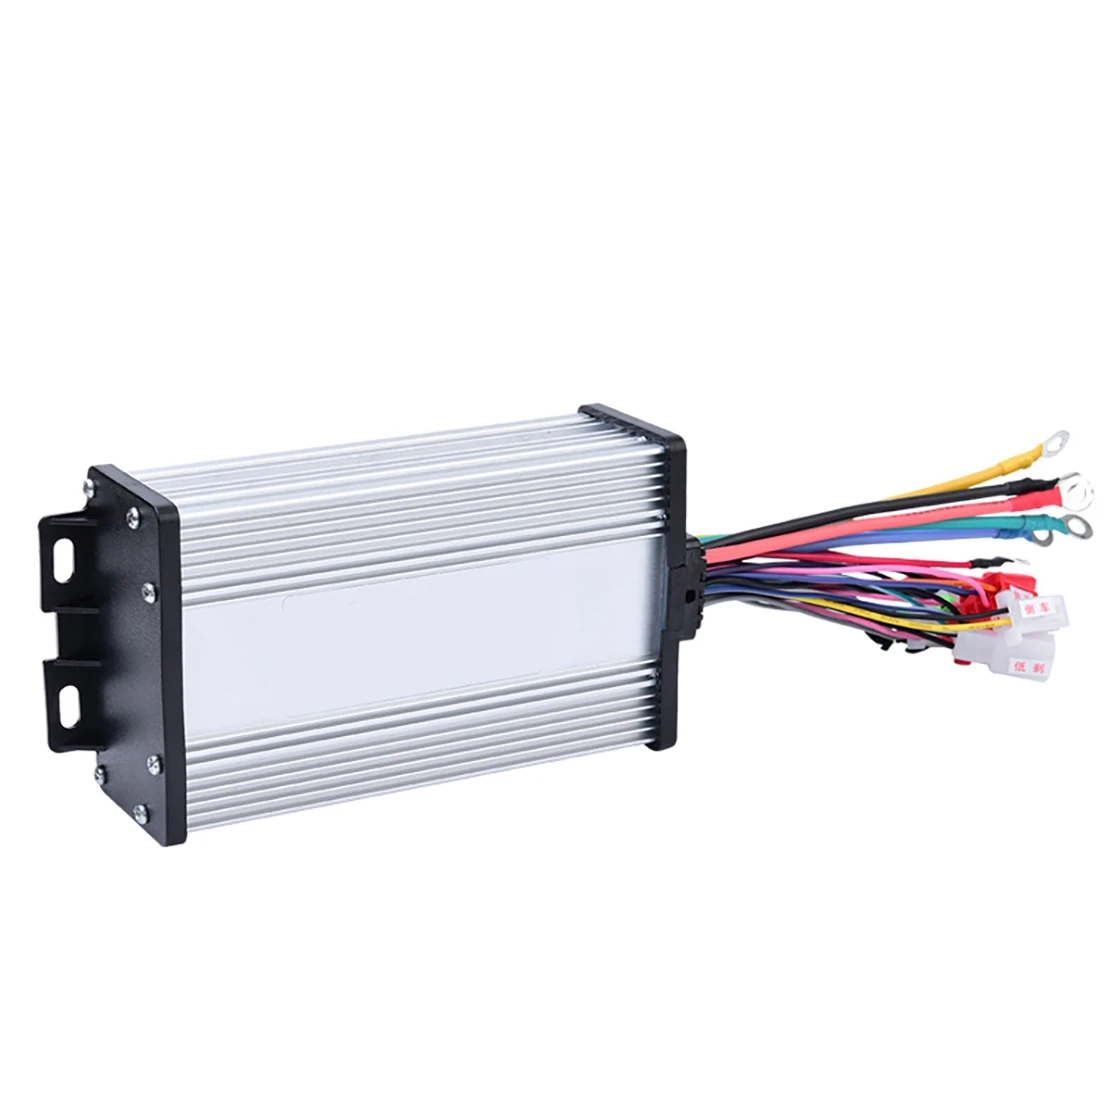 

64V 600W 12Tubes Brushless Controller Aluminium Alloy E-Bike Brushless Motor Controller for Electric Bicycle Scooter